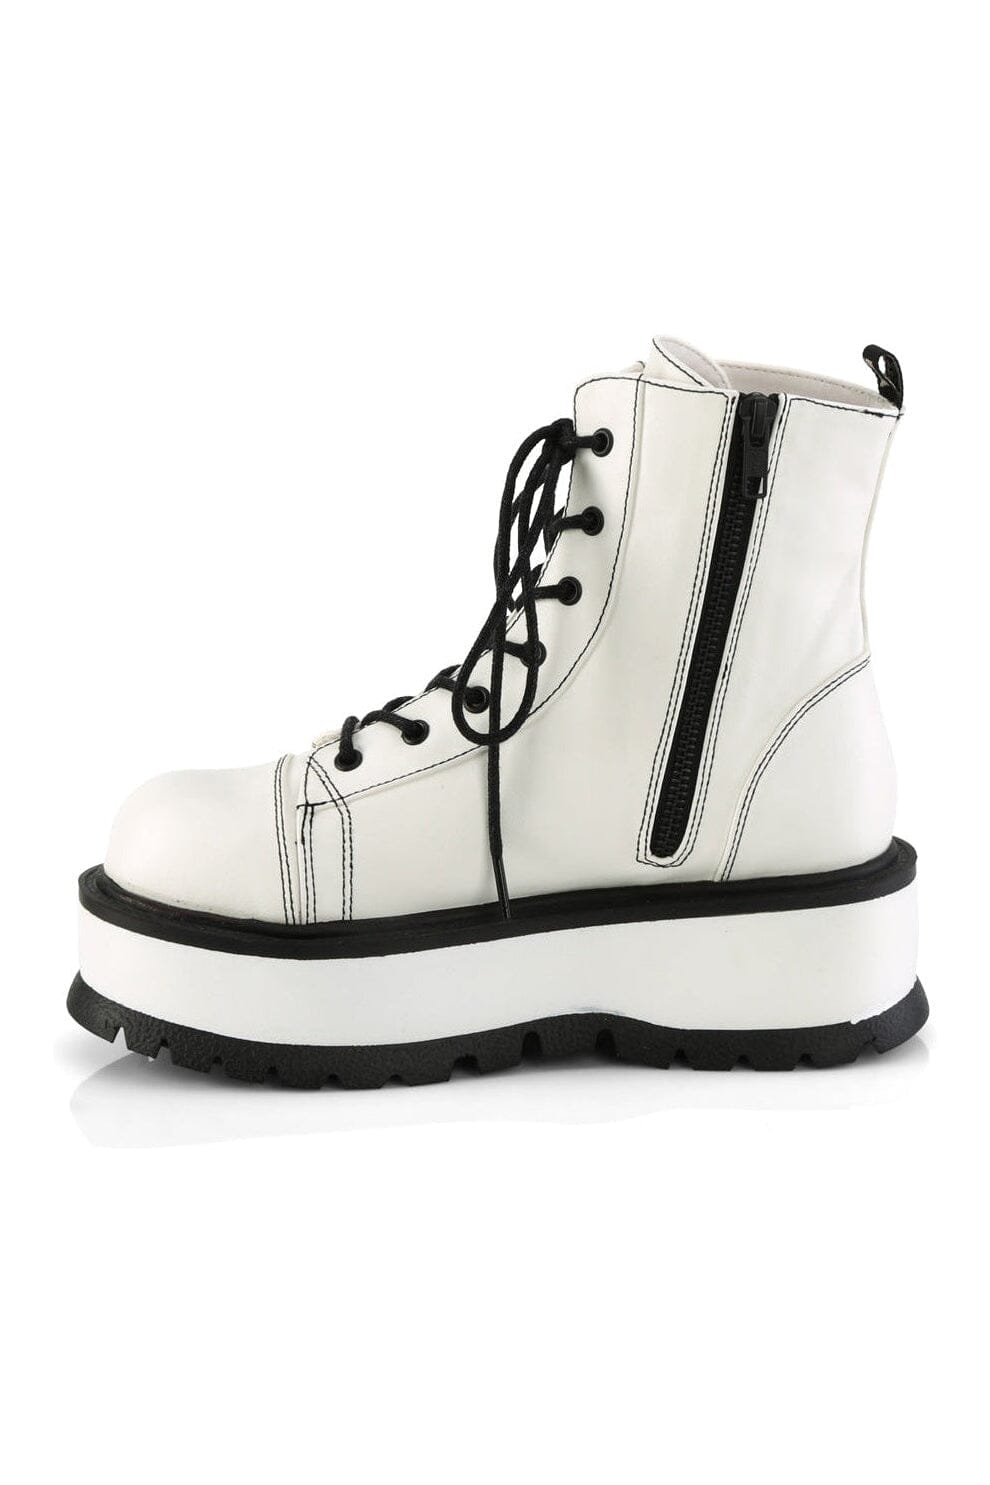 SLACKER-55 White Vegan Leather Ankle Boot-Ankle Boots-Demonia-SEXYSHOES.COM